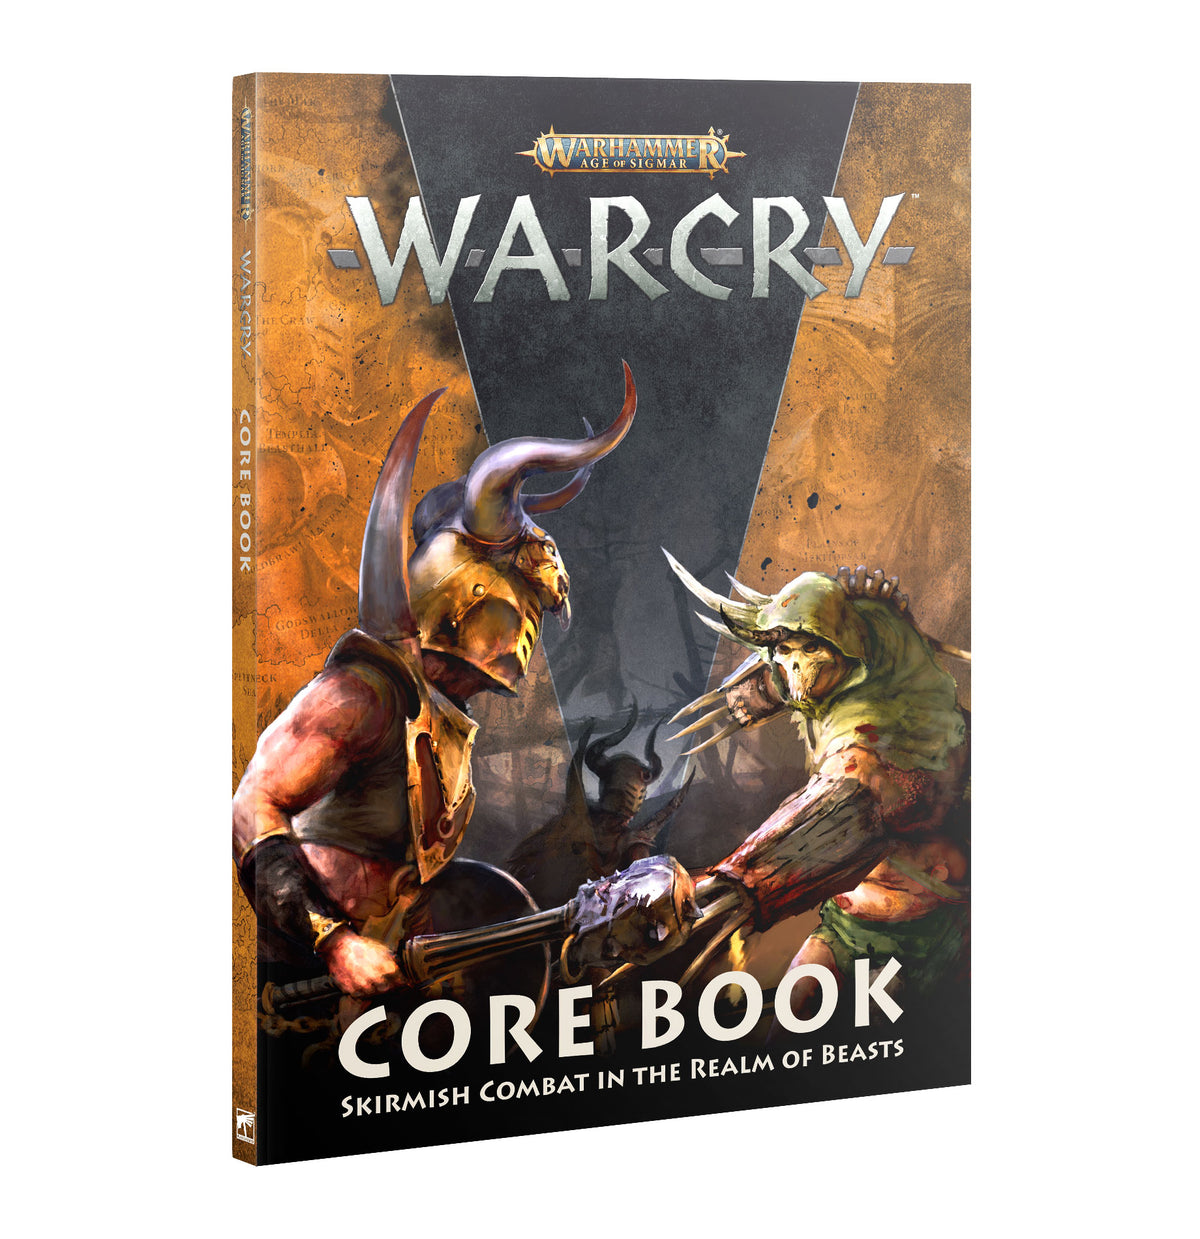 Warcry: Core Book (Warhammer Age of Sigmar)